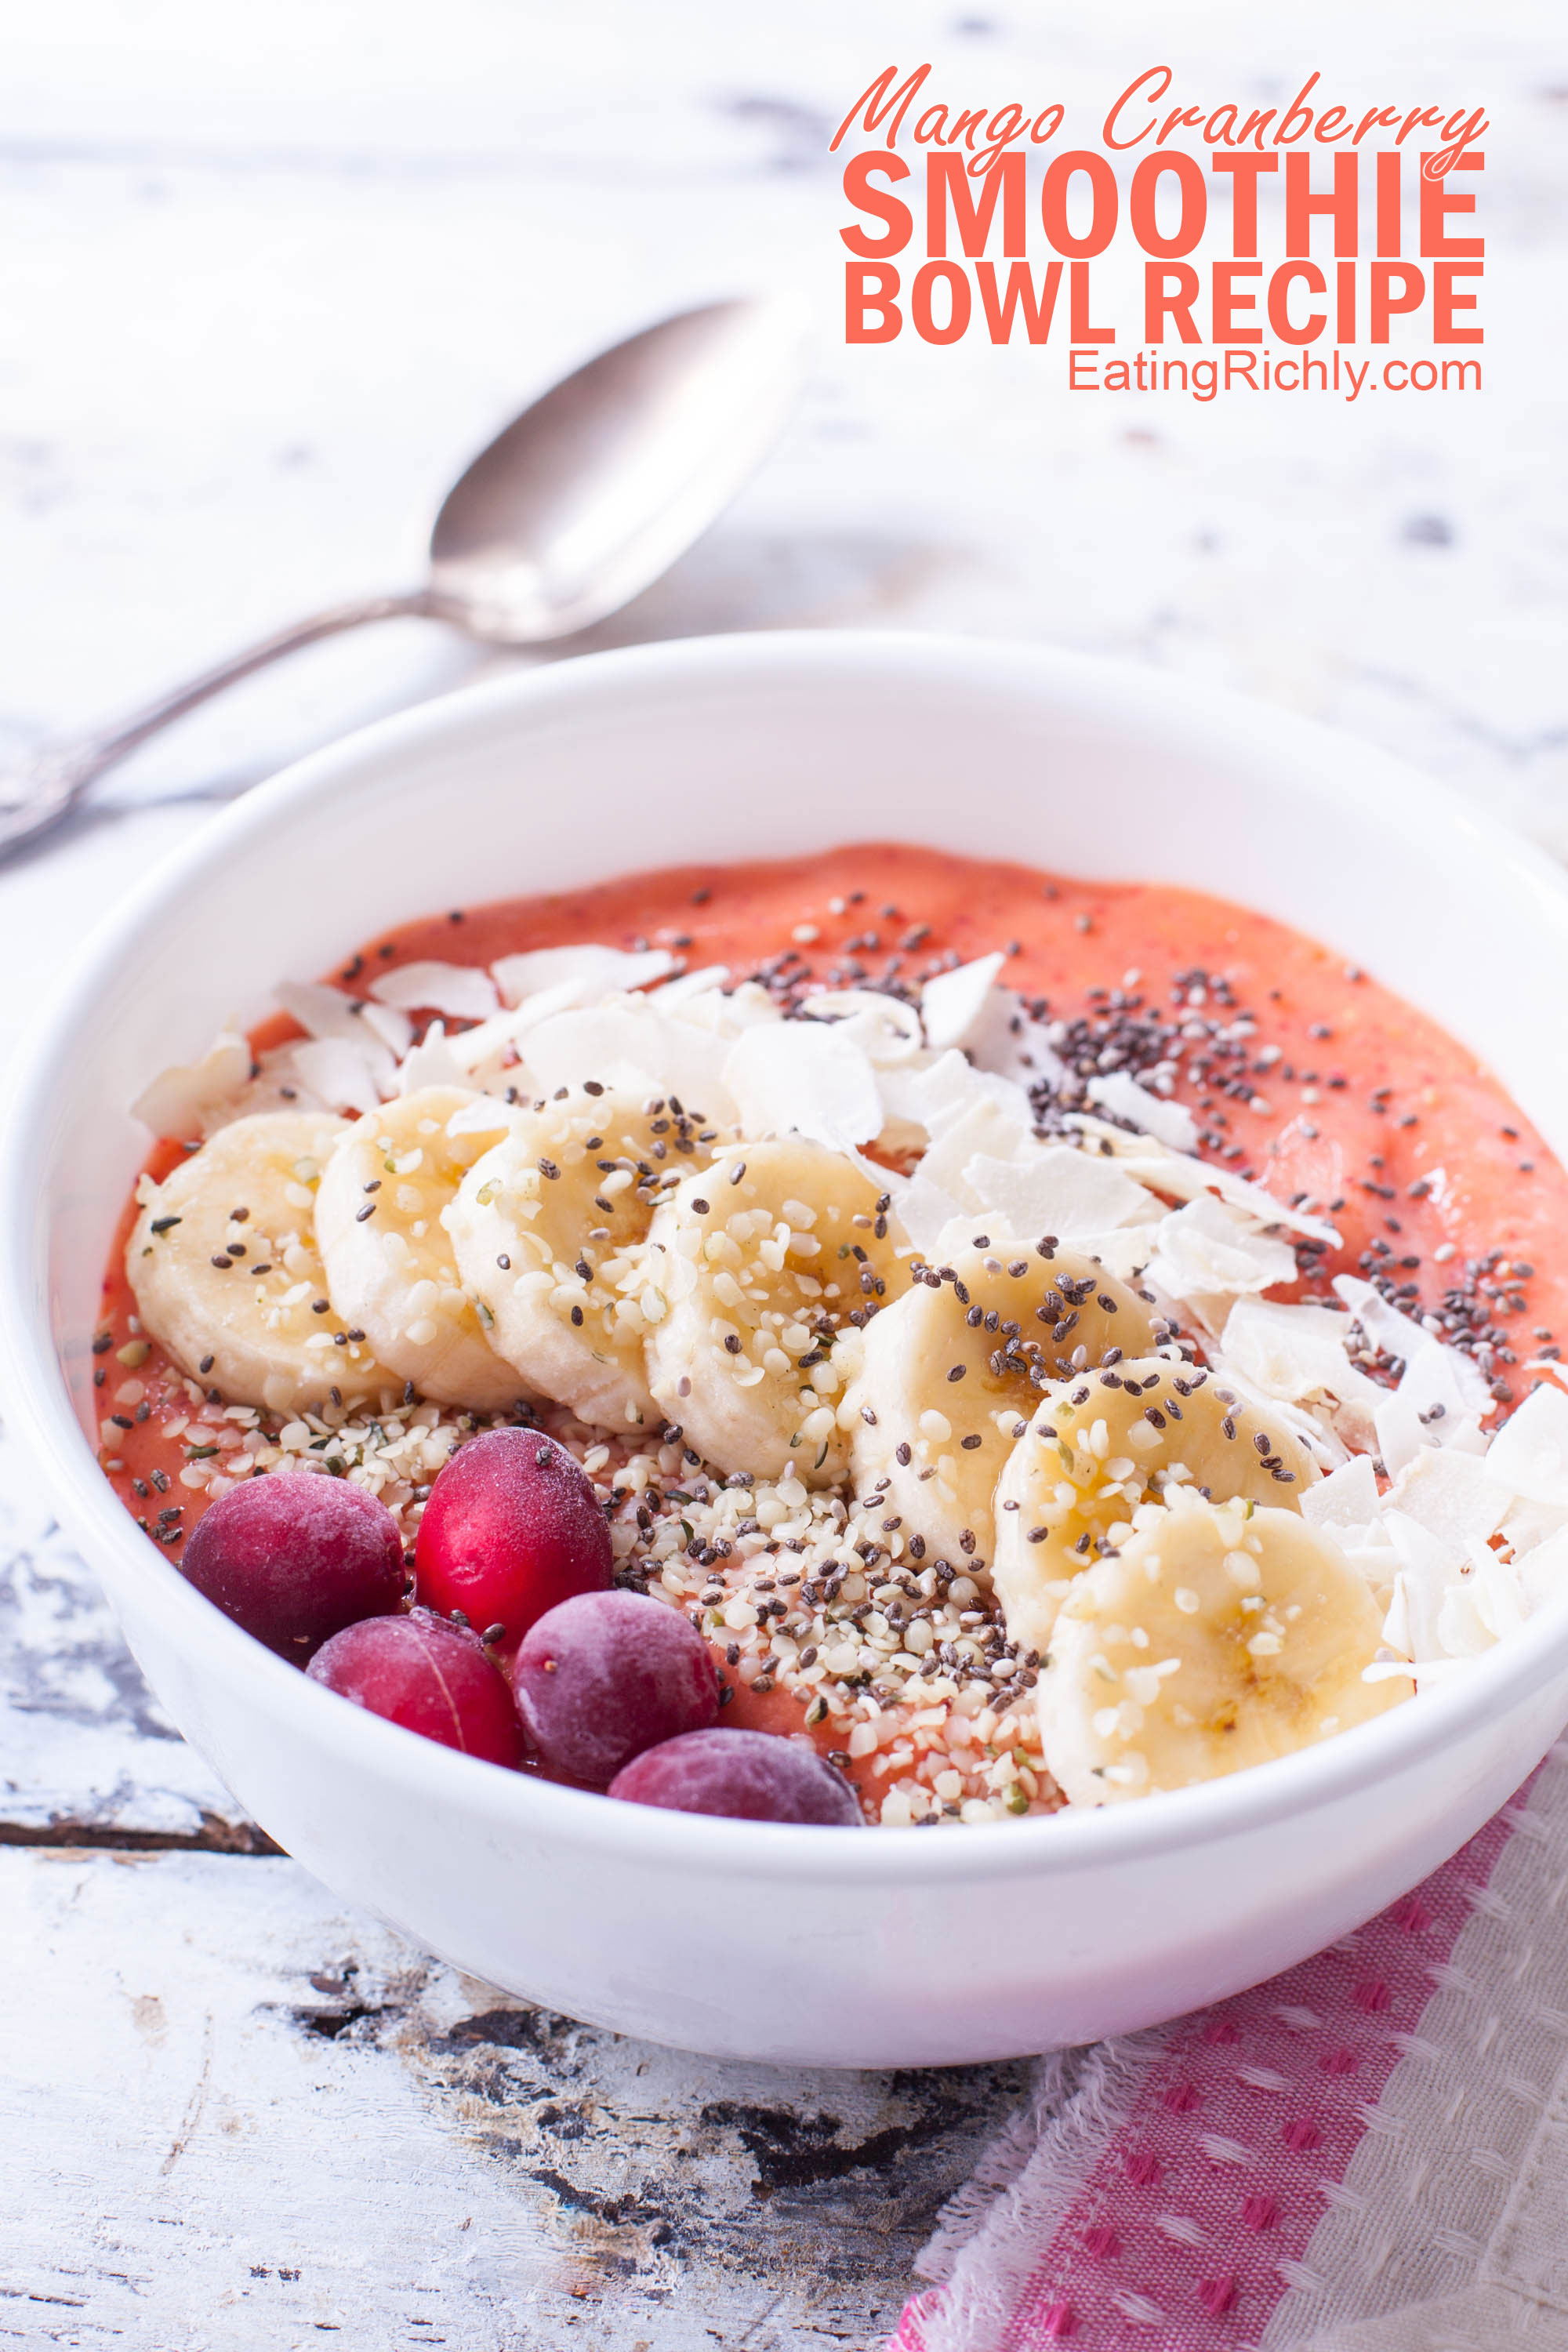 Smoothie Bowl with Mango, Cranberry, and Banana - Eating Richly